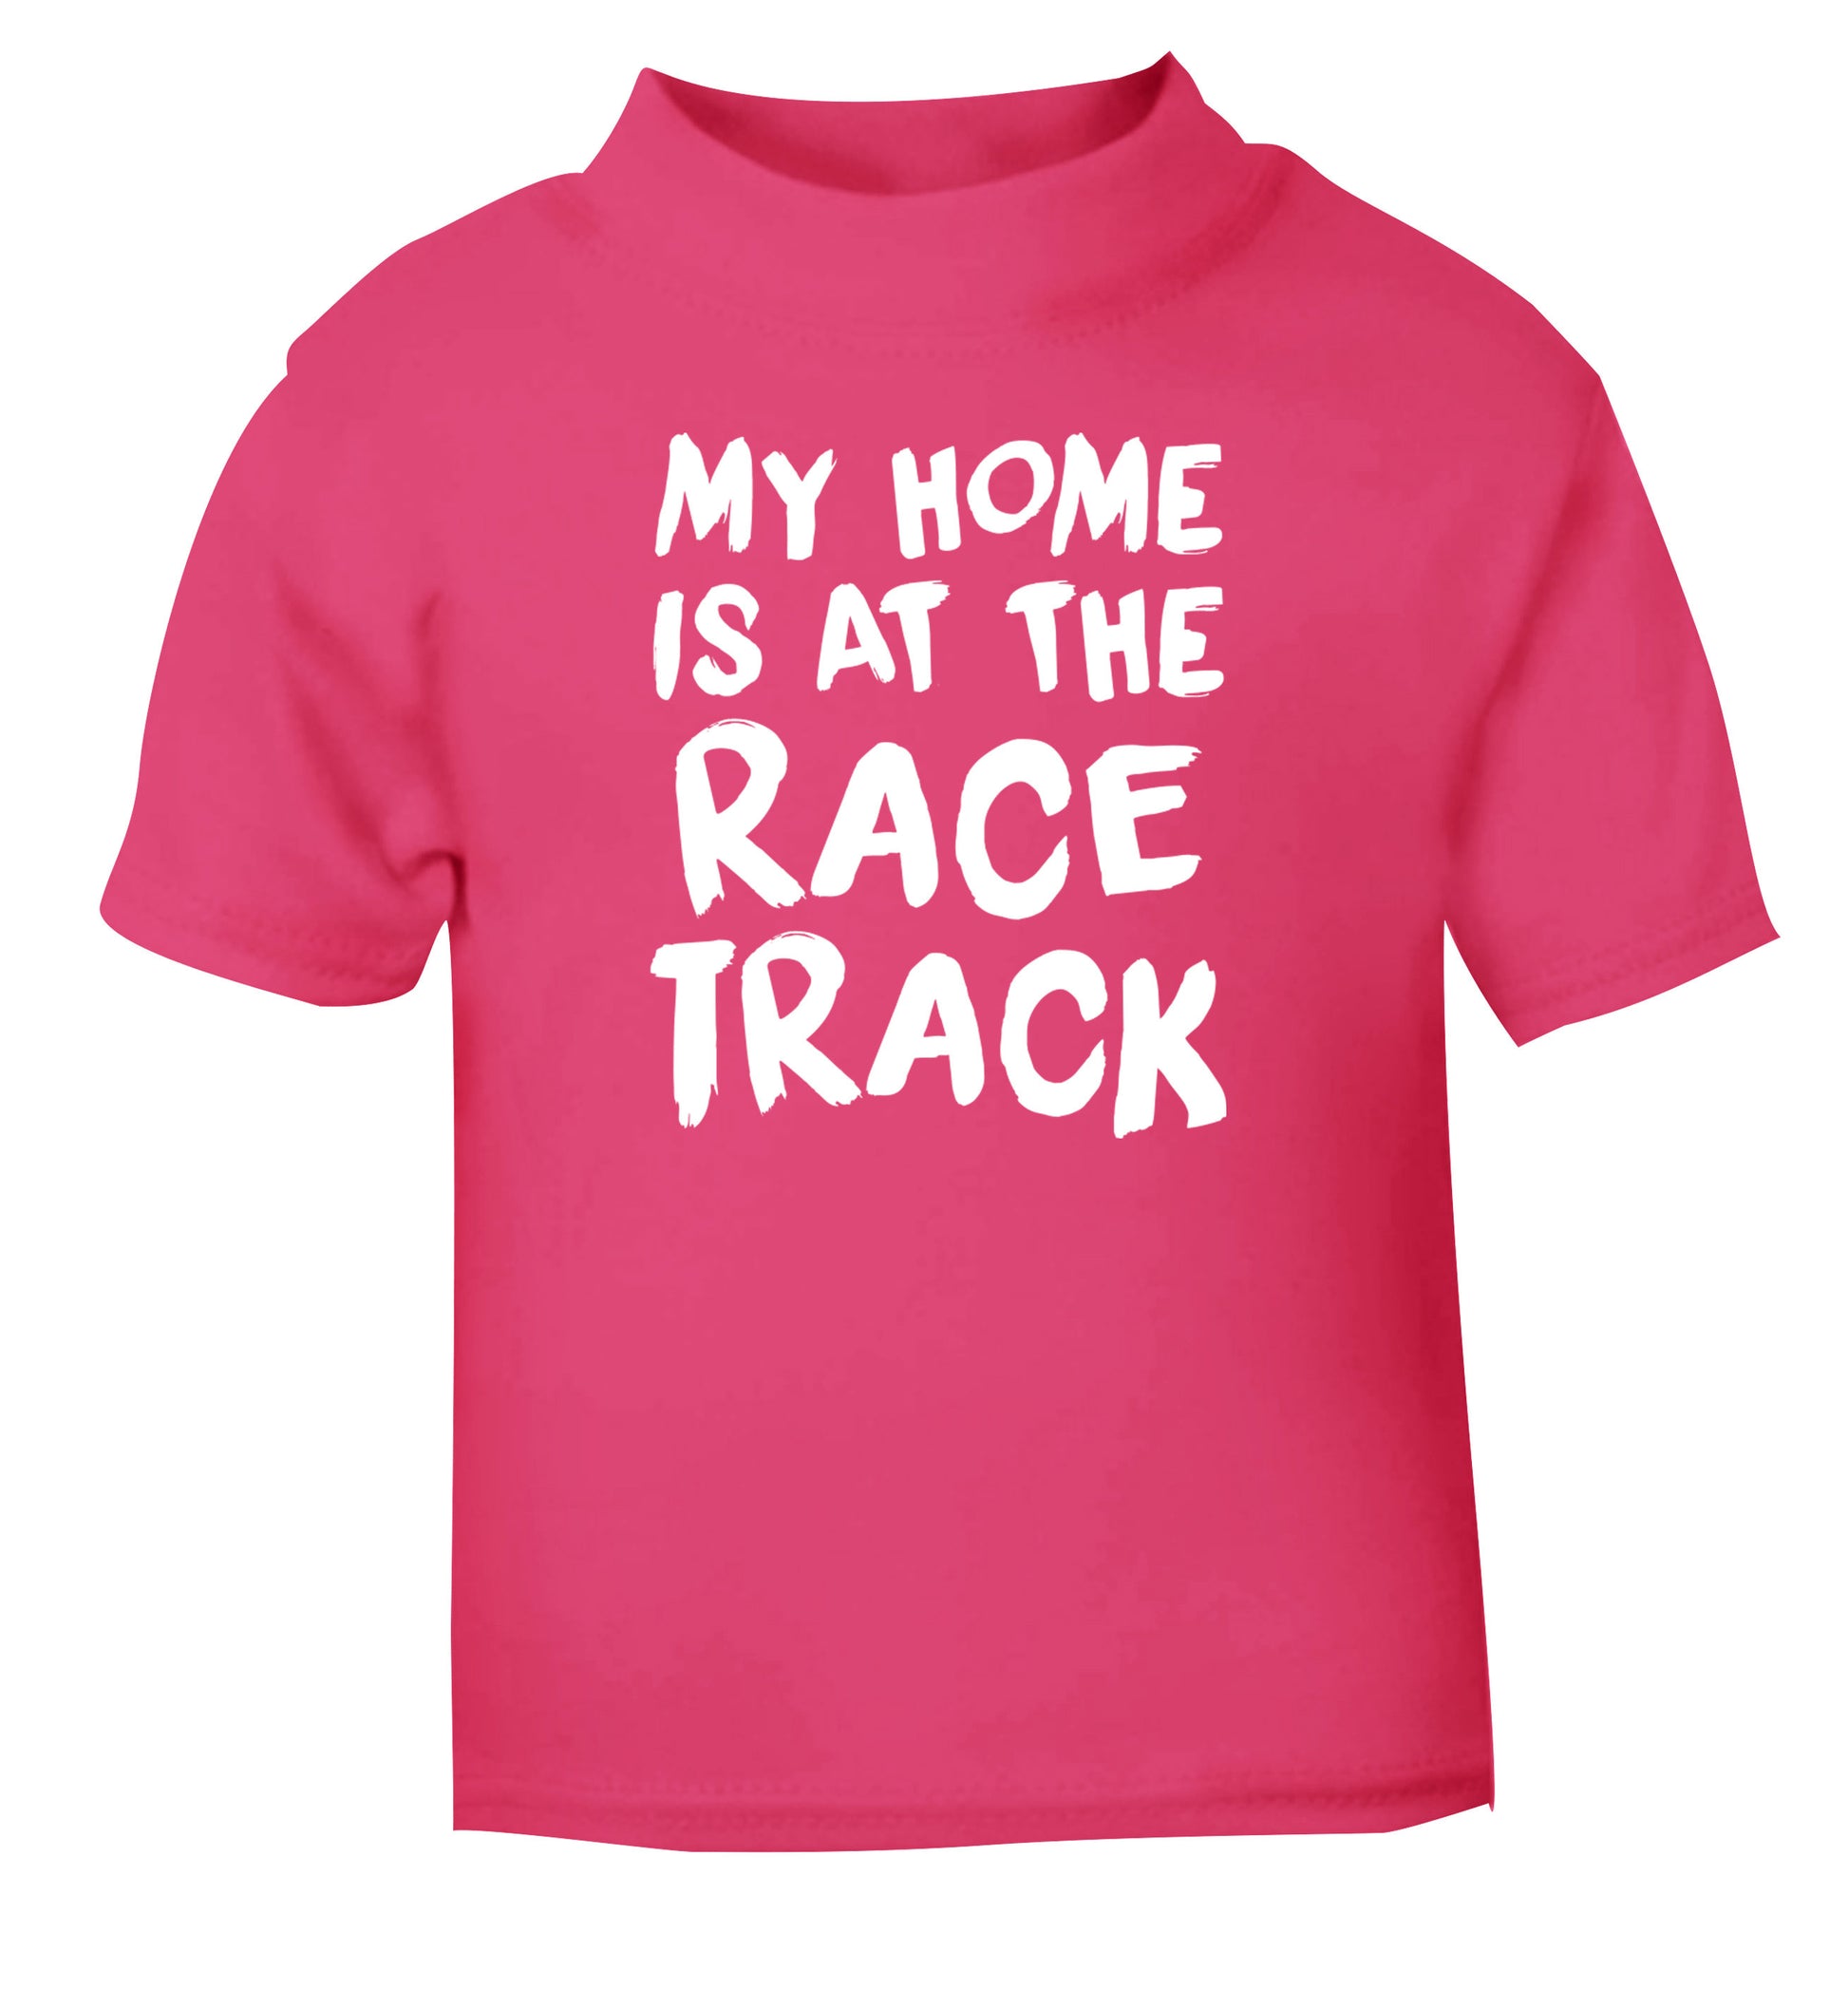 My home is at the race track pink Baby Toddler Tshirt 2 Years